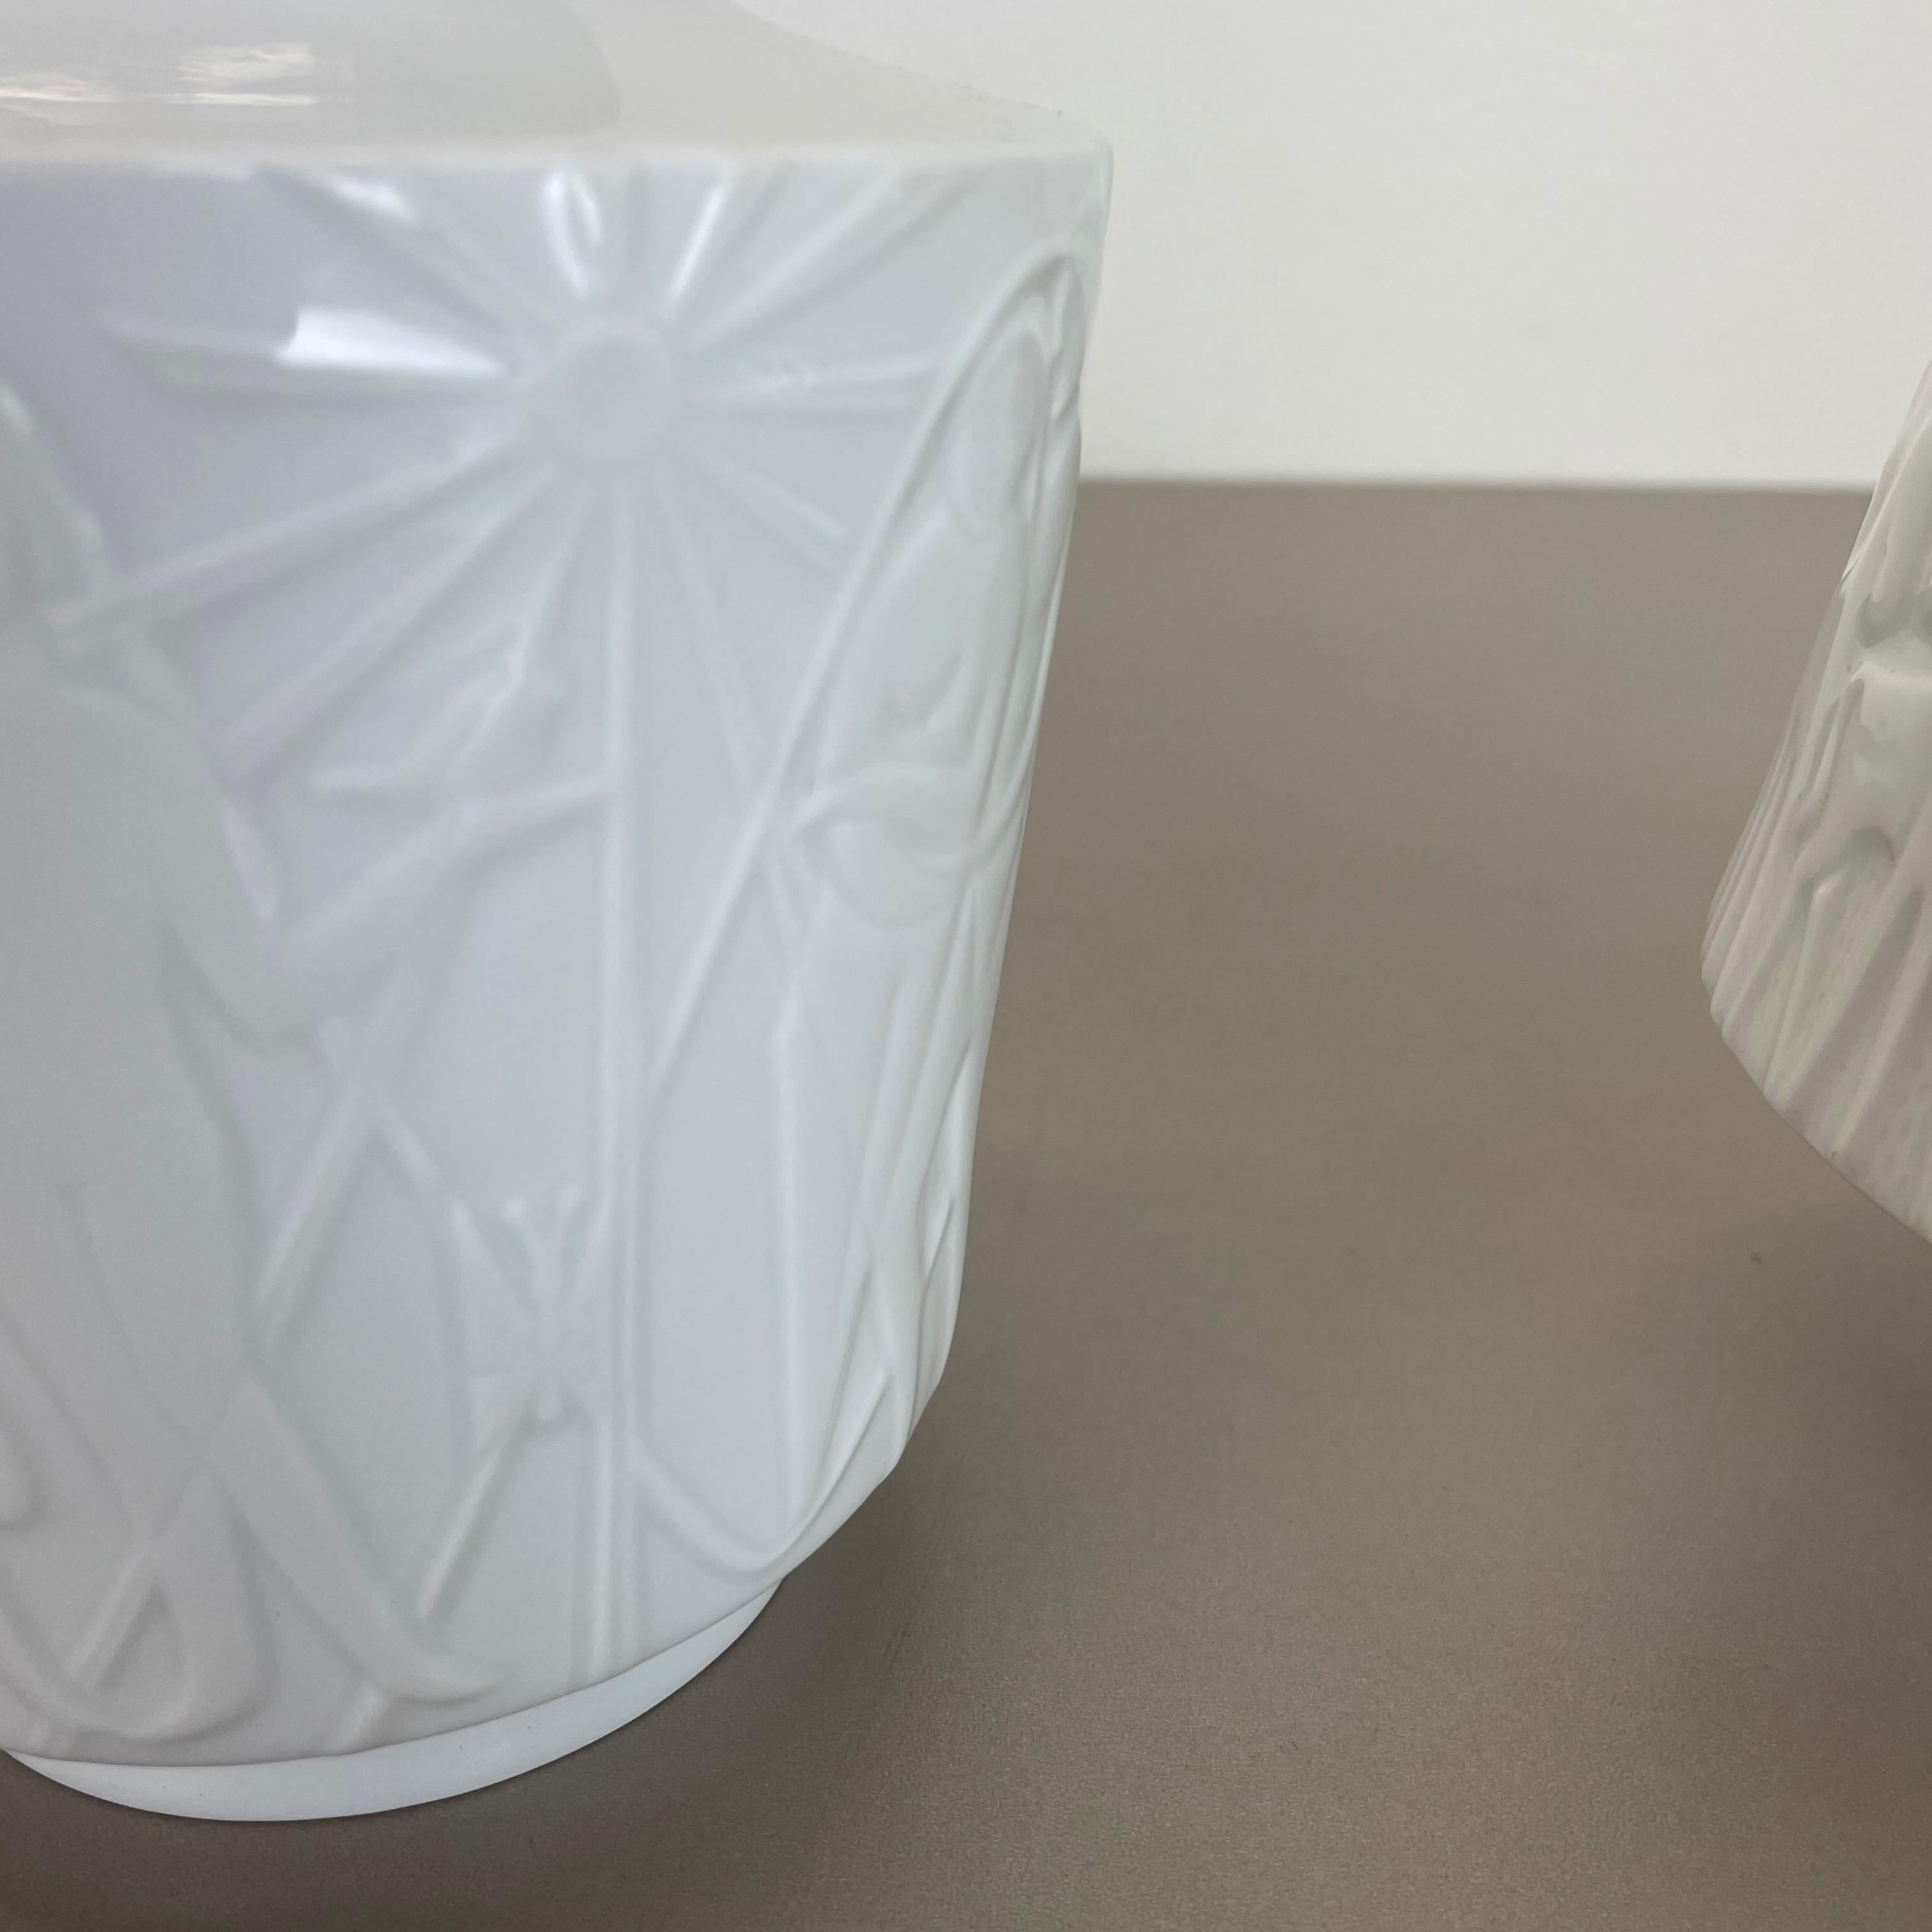 Set of 2 OP Art Biscuit Porcelain Vases by Edelstein Bavaria, Germany, 1970s In Good Condition For Sale In Kirchlengern, DE